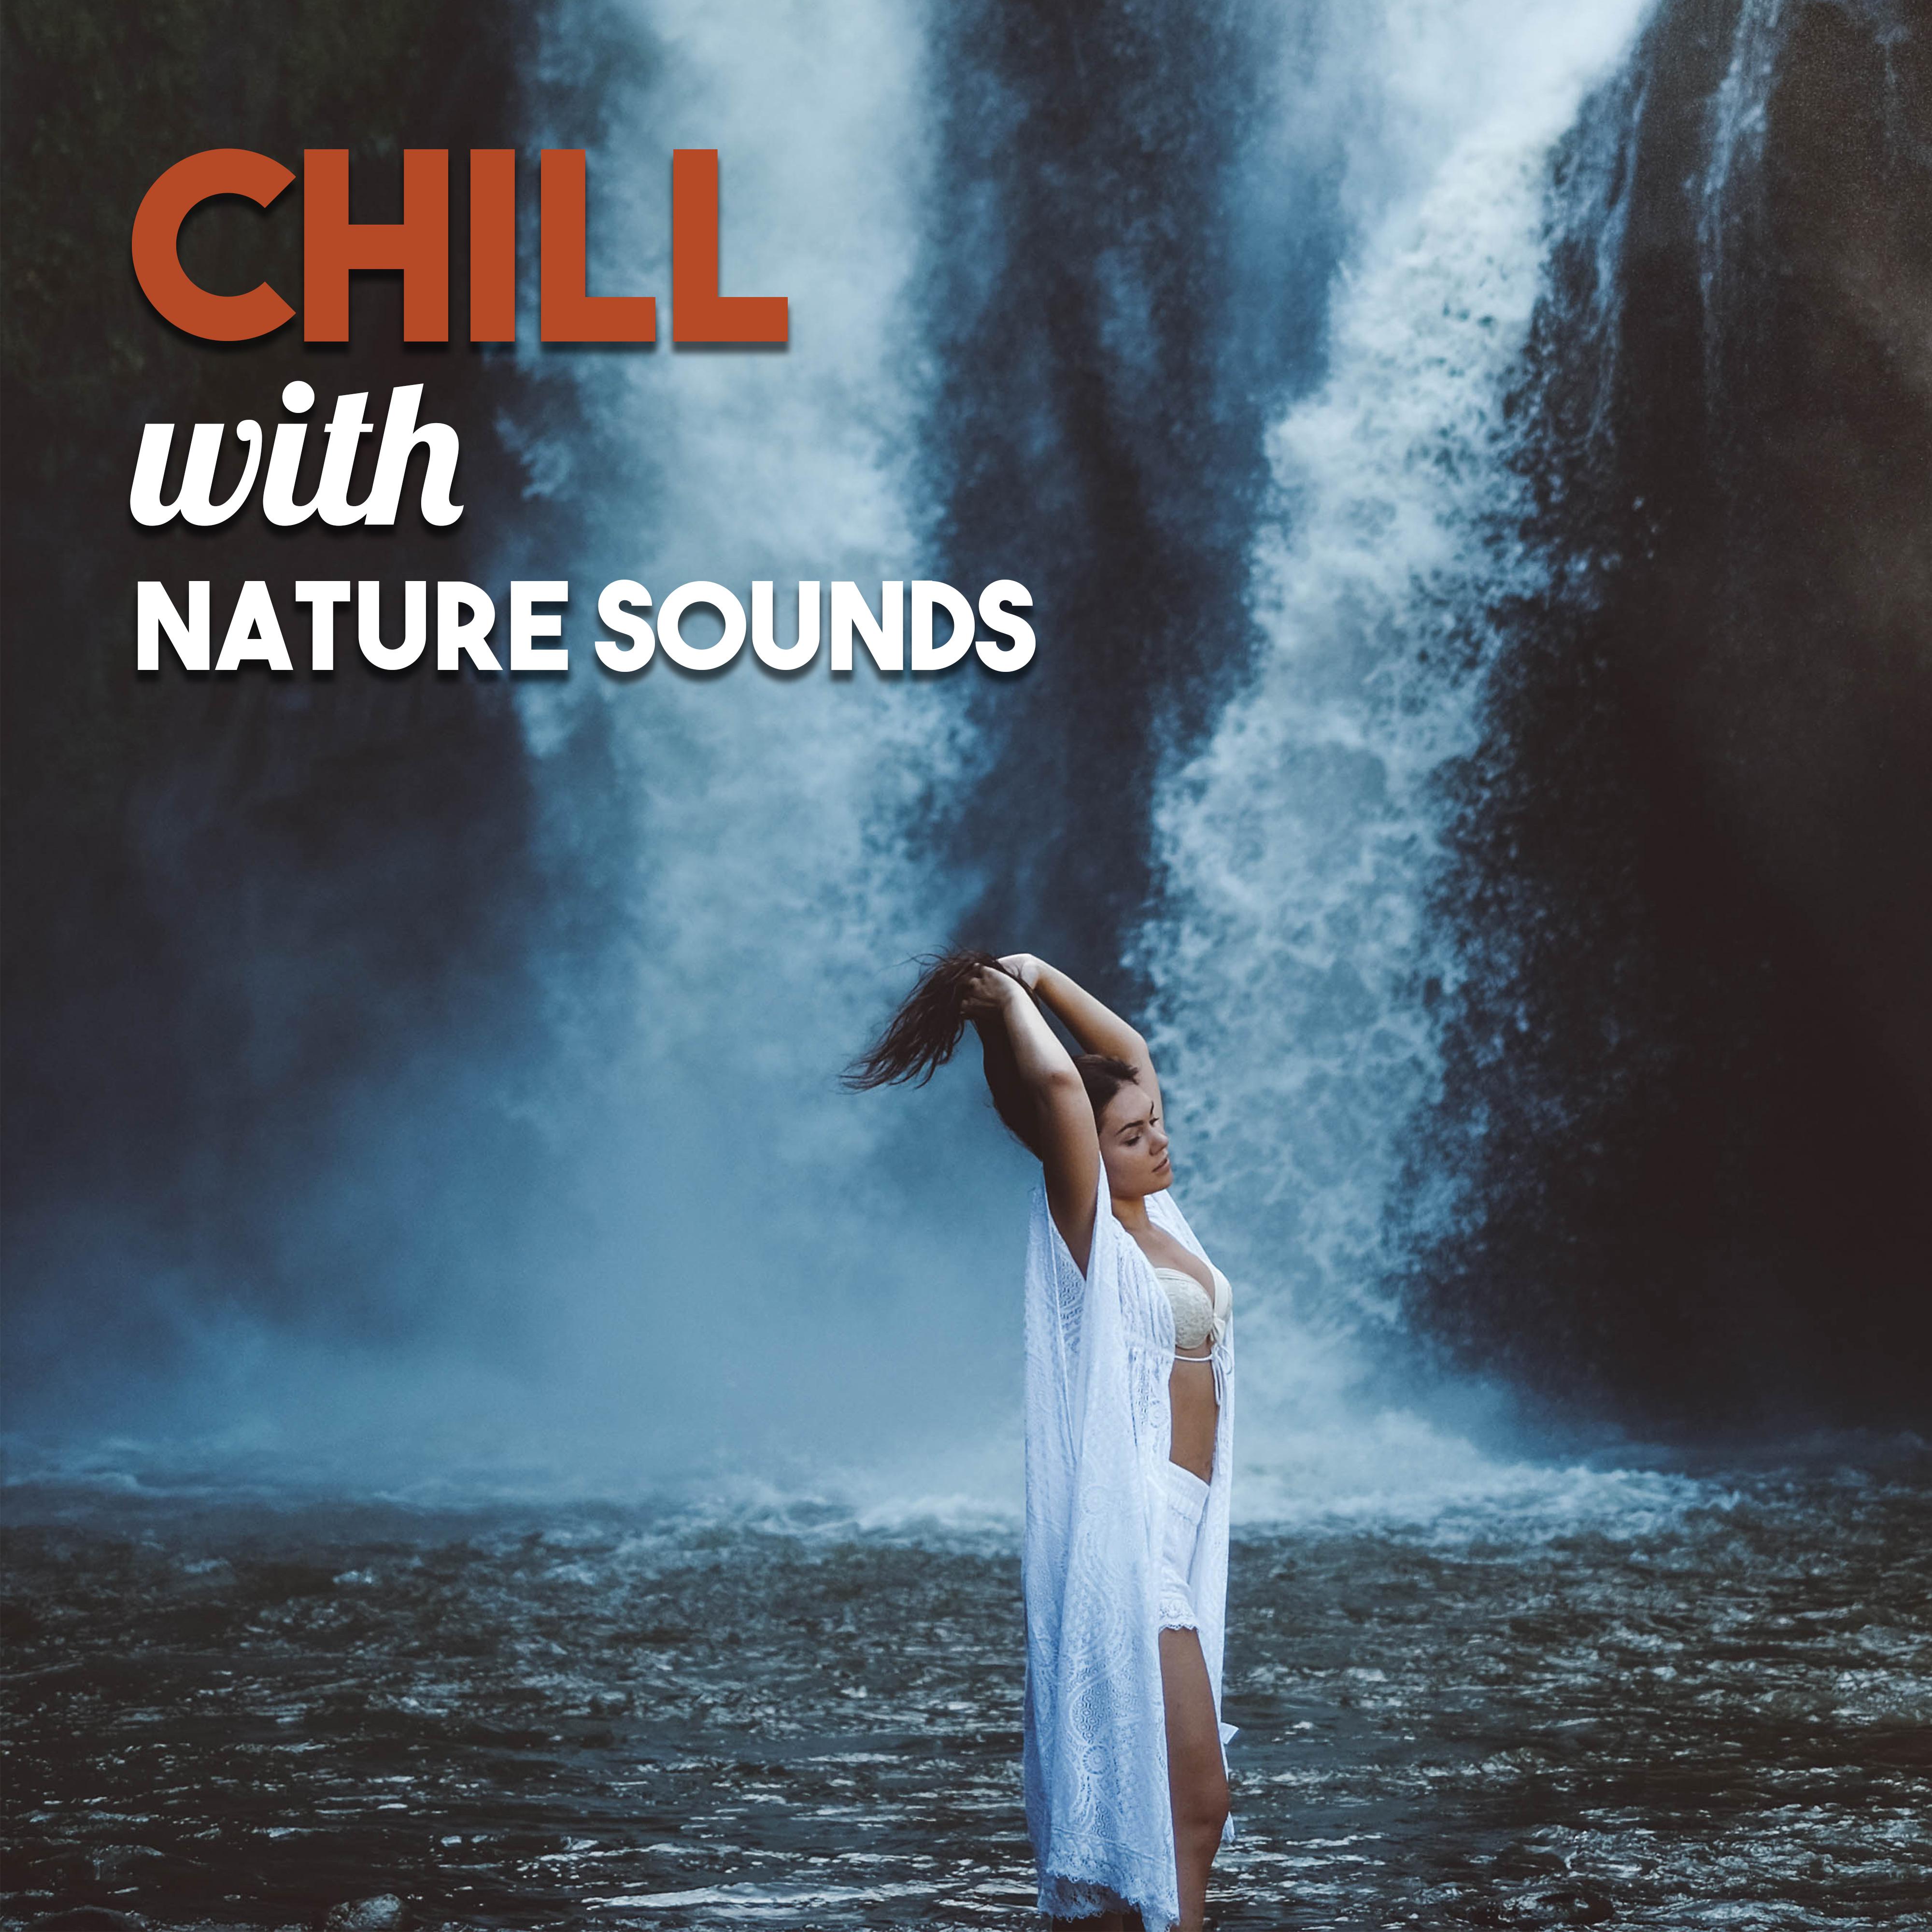 Chill with Nature Sounds – Relax Under Palms, Deep Meditation, Holiday, Relief, Summertime, Best Chillout Music to Rest